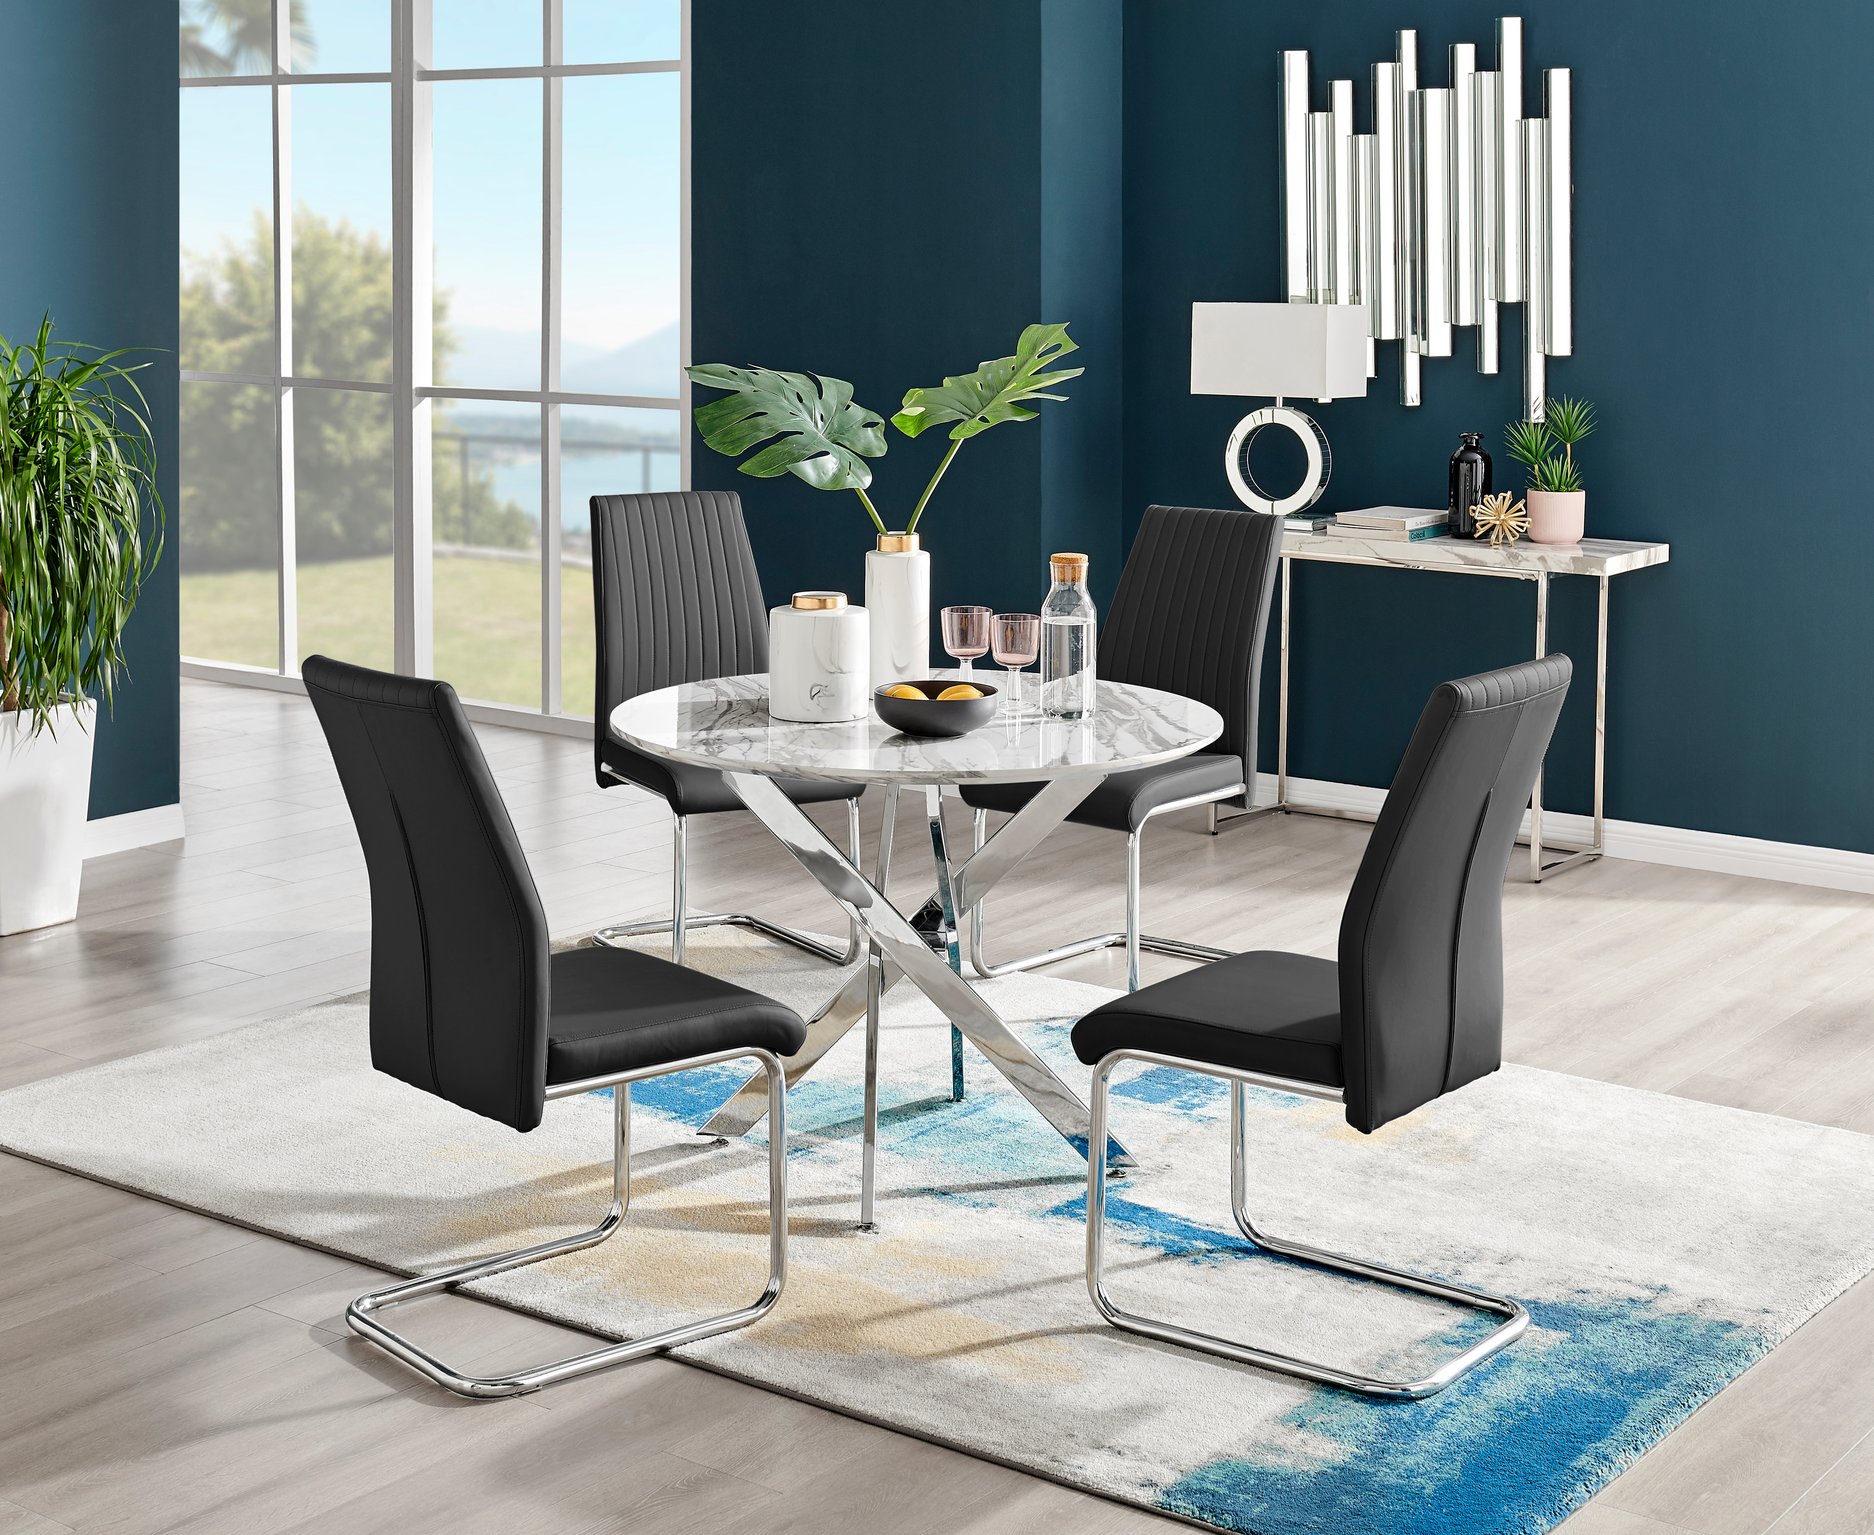 Novara White Marble Round Dining Table 100cm and 4 Lorenzo Chairs Furniture Set